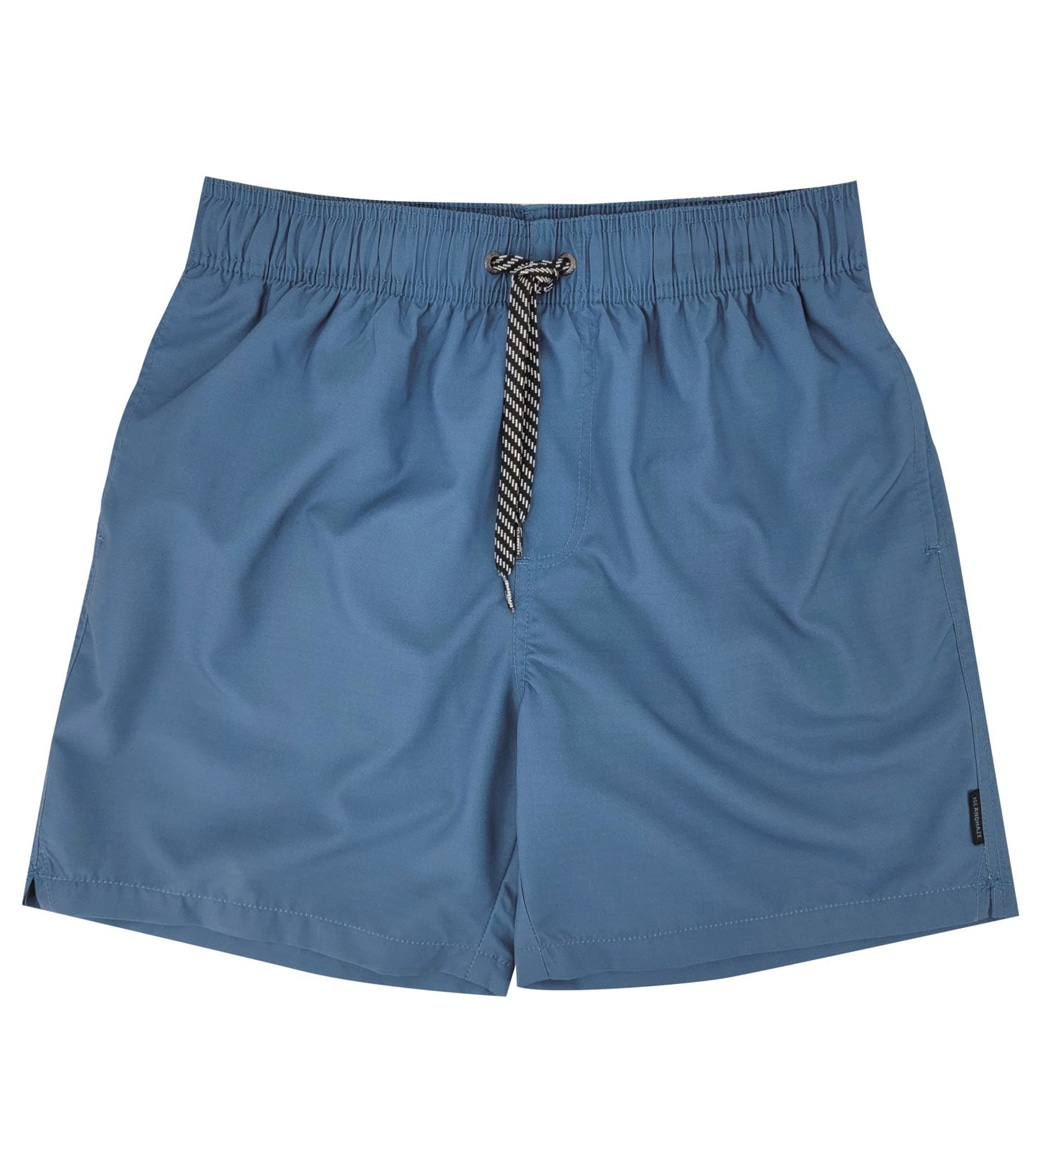 Island Haze Men's 16.5 Barbados Solid Volley Shorts - Dusty Blue Large Polyester - Swimoutlet.com